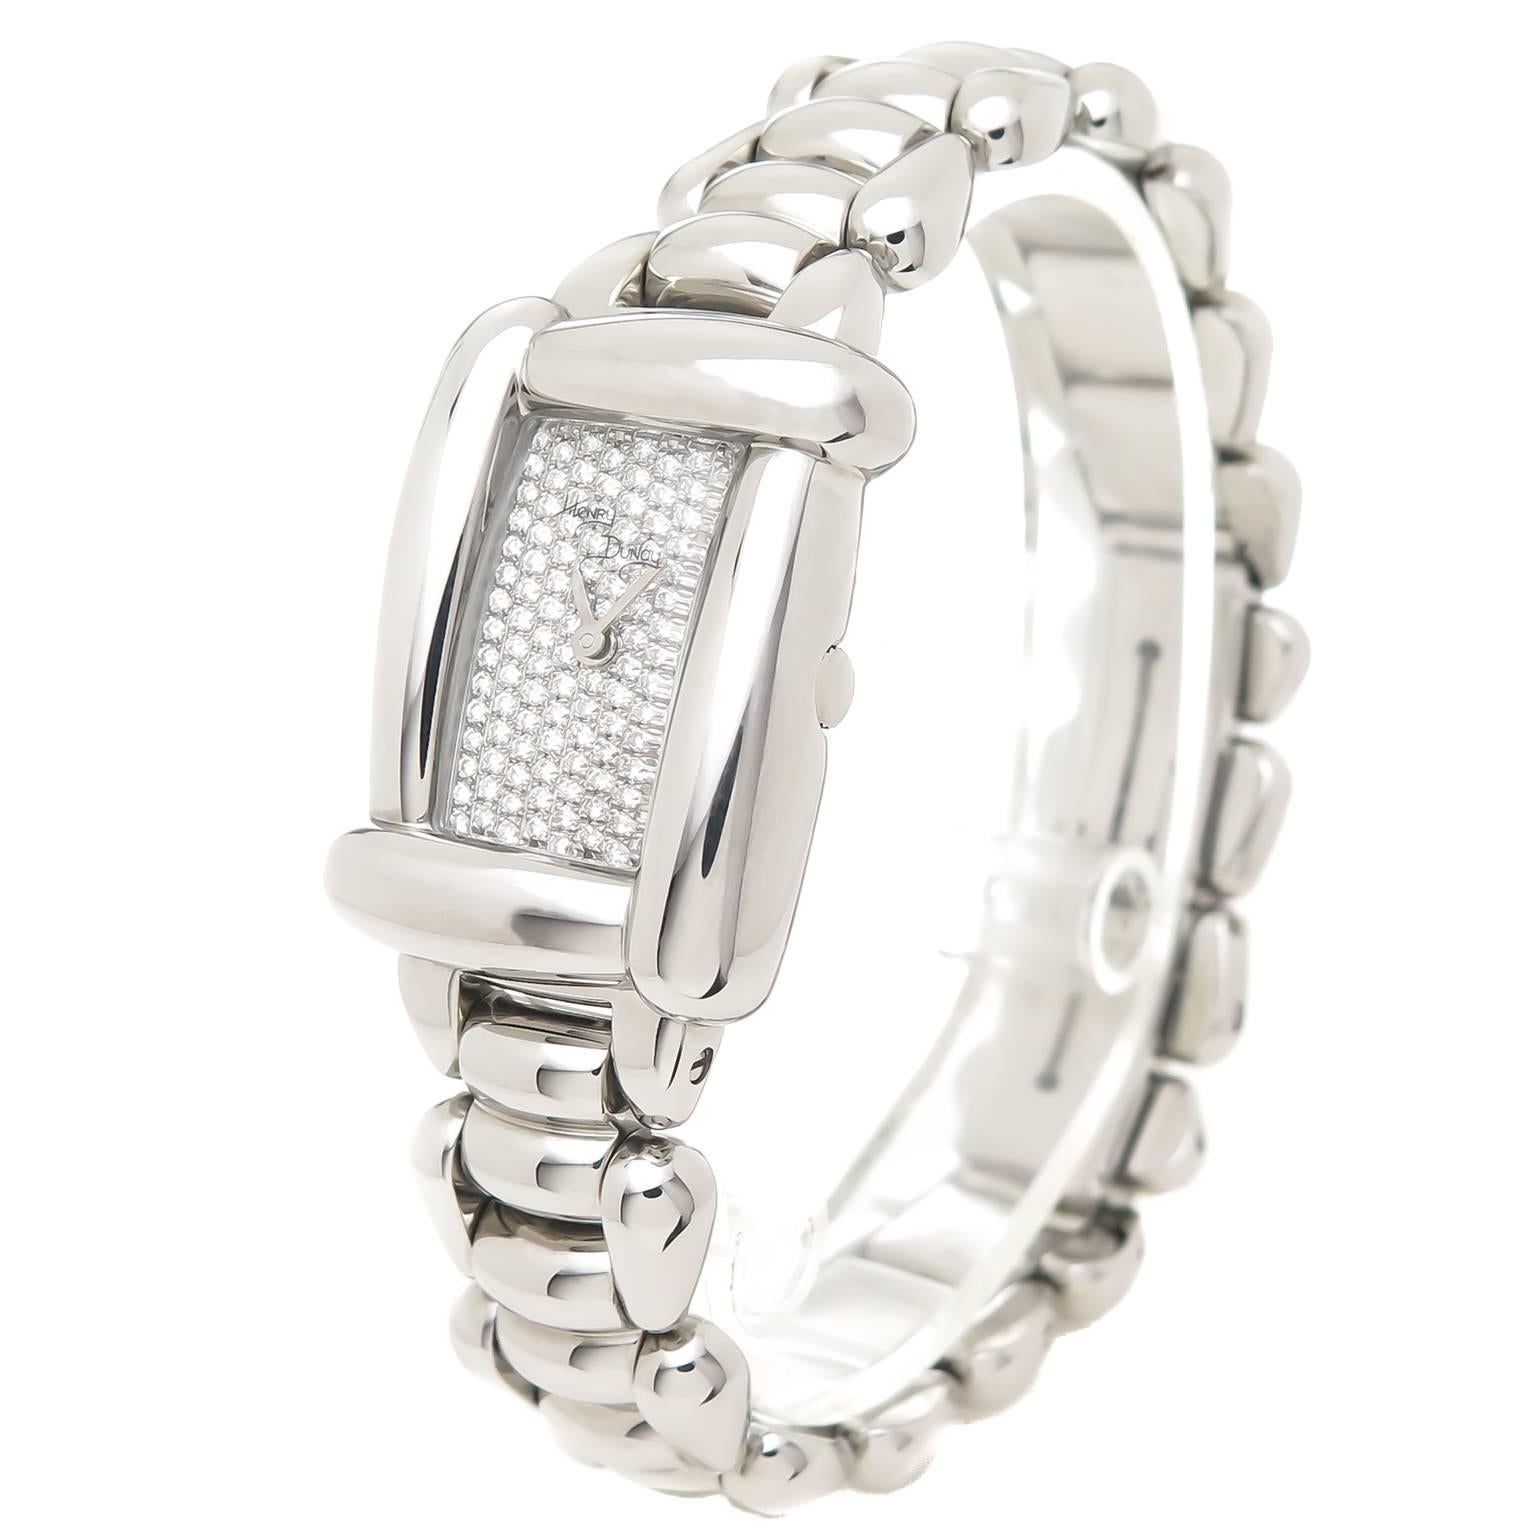 Circa 2005 Henry Dunay Medea collection Wrist Watch, 37 X 20 MM Stainless Steel water resistant case, Quartz Movement, Diamond Pave dial of round Brilliant cut Diamonds totaling approximately 1.30 Carat. 5/8 inch wide Steel link bracelet with